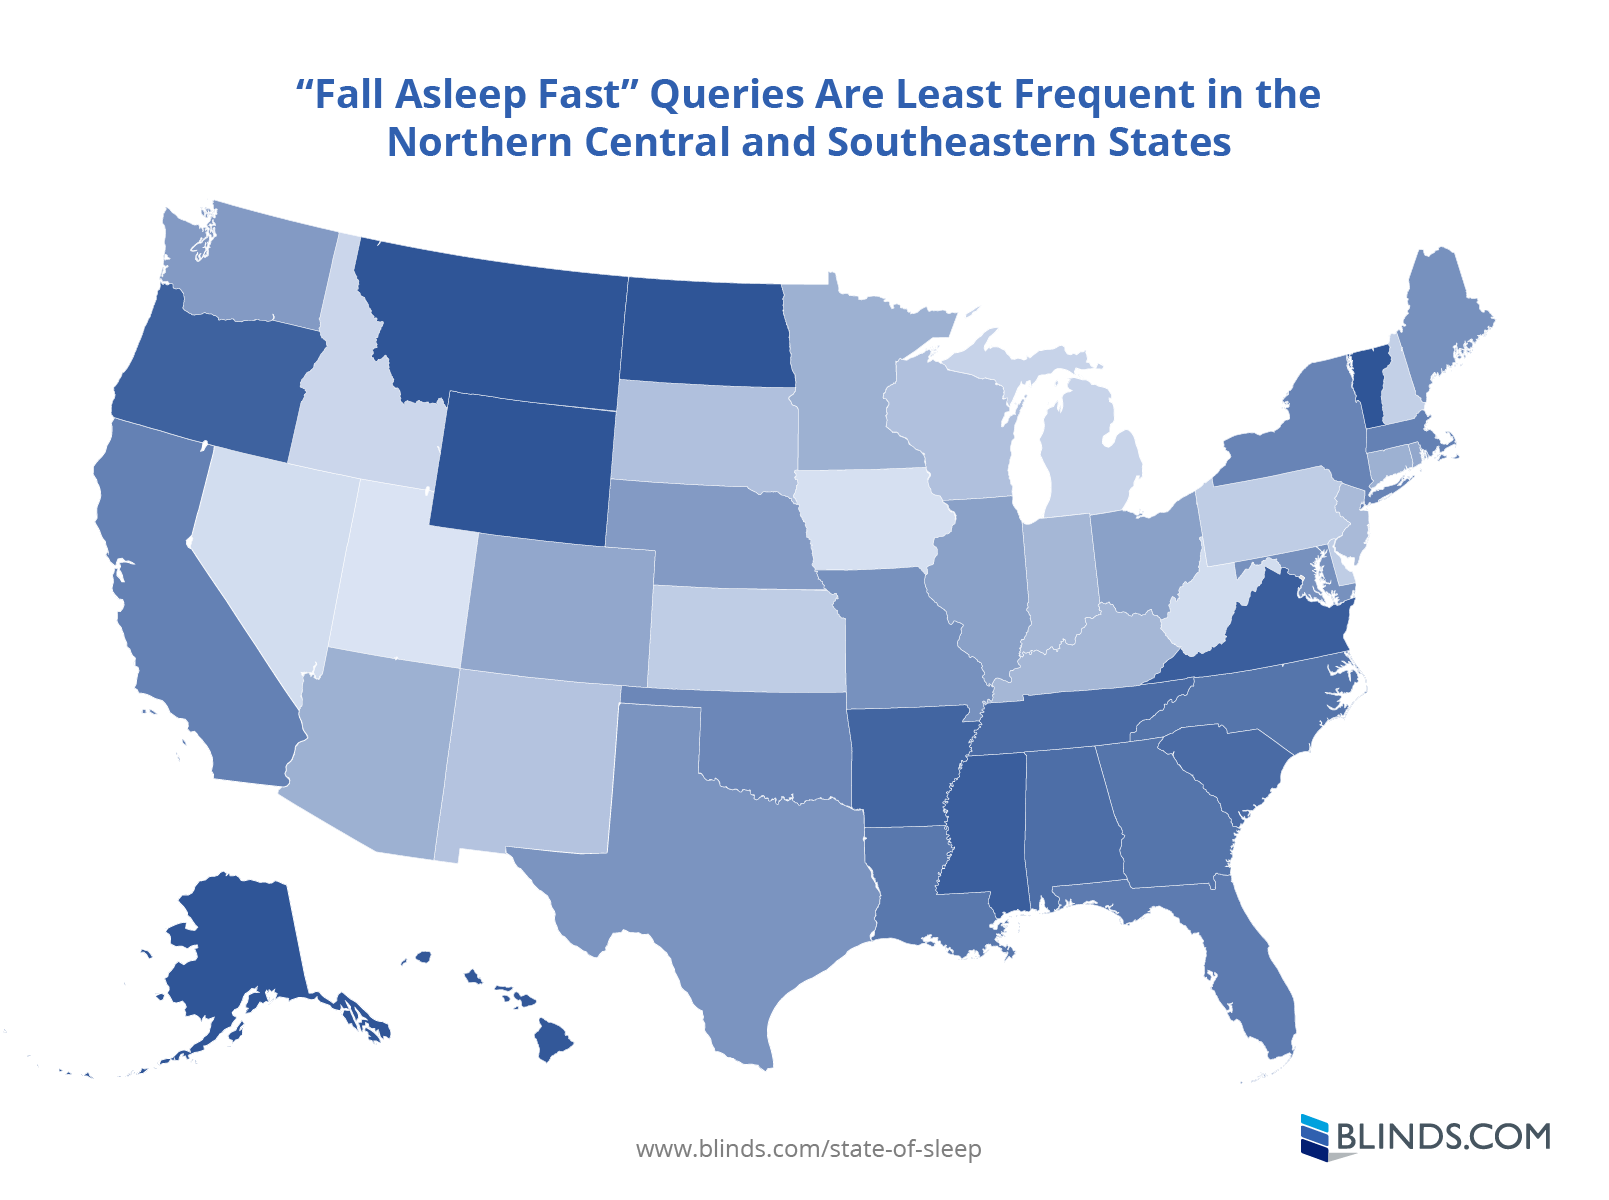 "Fall Asleep Fast" Queries Are Least Frequent in the Northern Central and Southeastern States